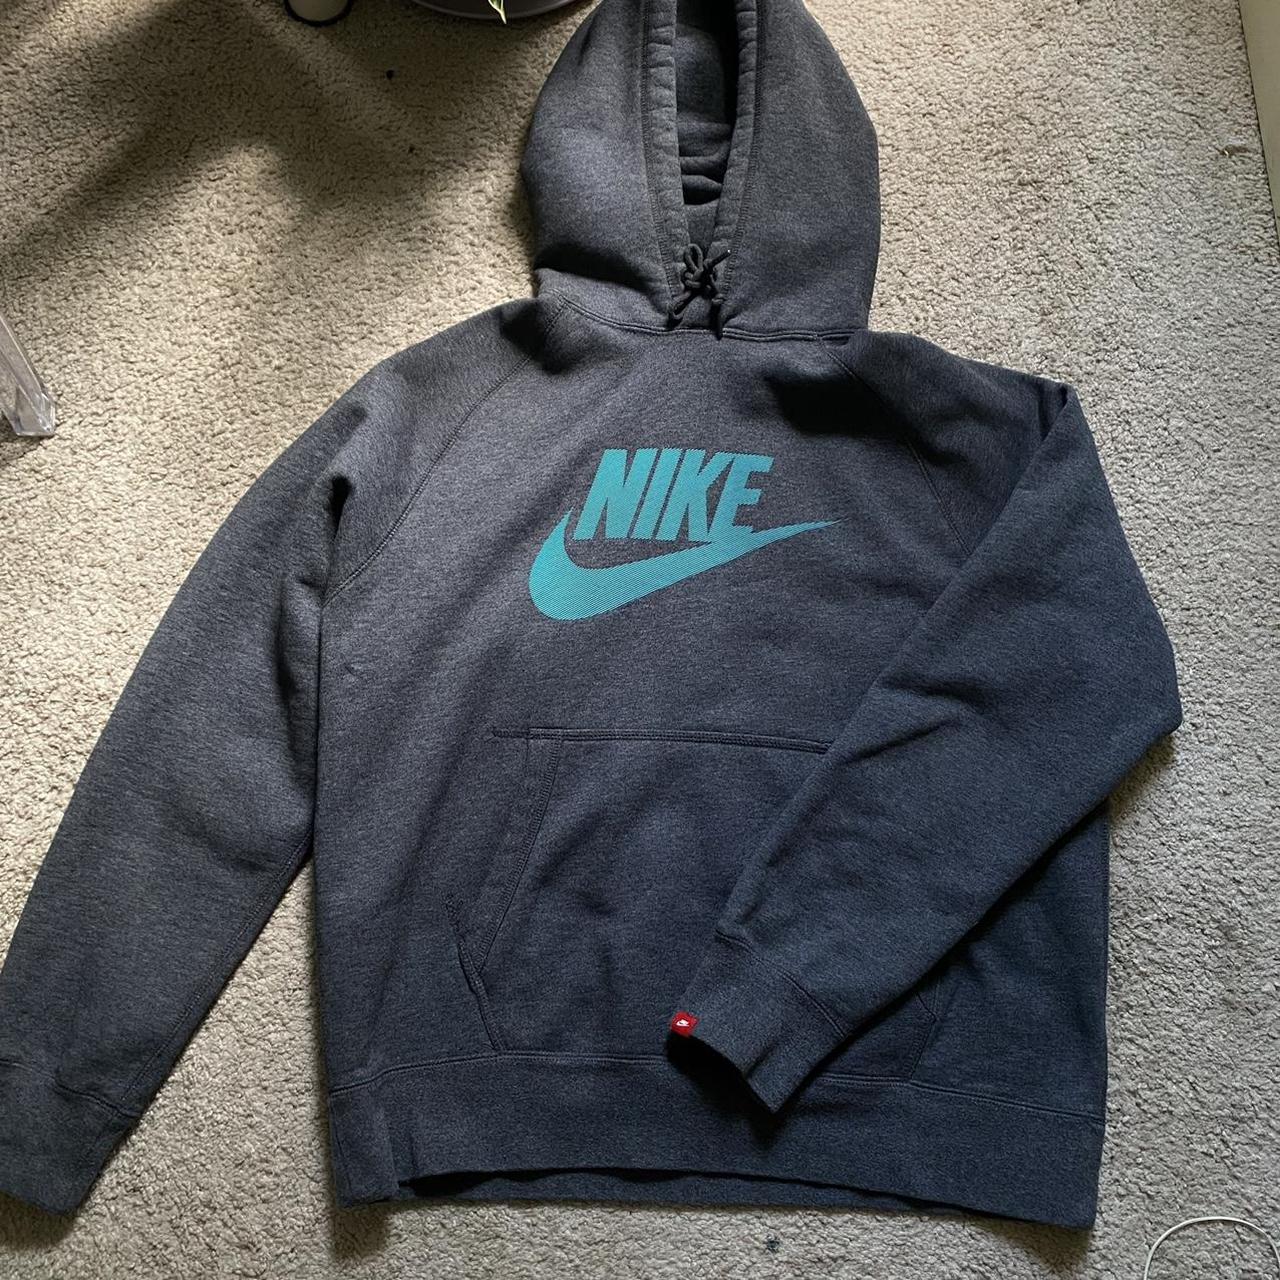 NIKE Hoodie 🗿 ⭐️condition is pristine! Like new with... - Depop